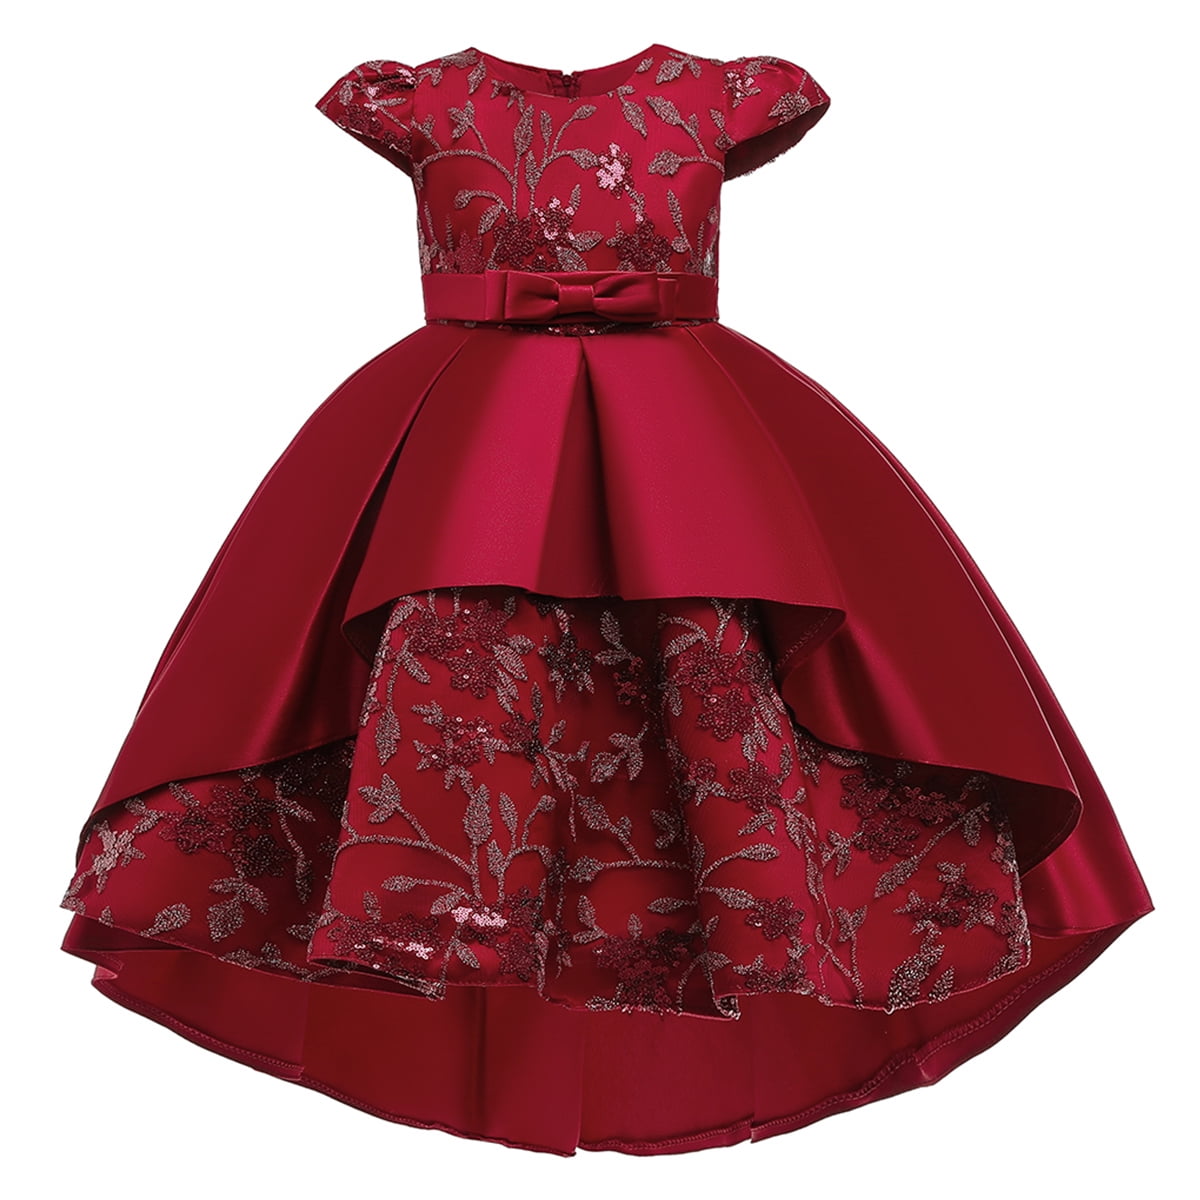 HAWEE Little Girls Flower High Low Tulle Dress Princess Wedding Pageant Birthday Party Formal Evening Dance Ball Gown d9095515 0ffe 469c a1da d1e04d4a6194.c30a3c006e2c380e897c2422edc97fdd